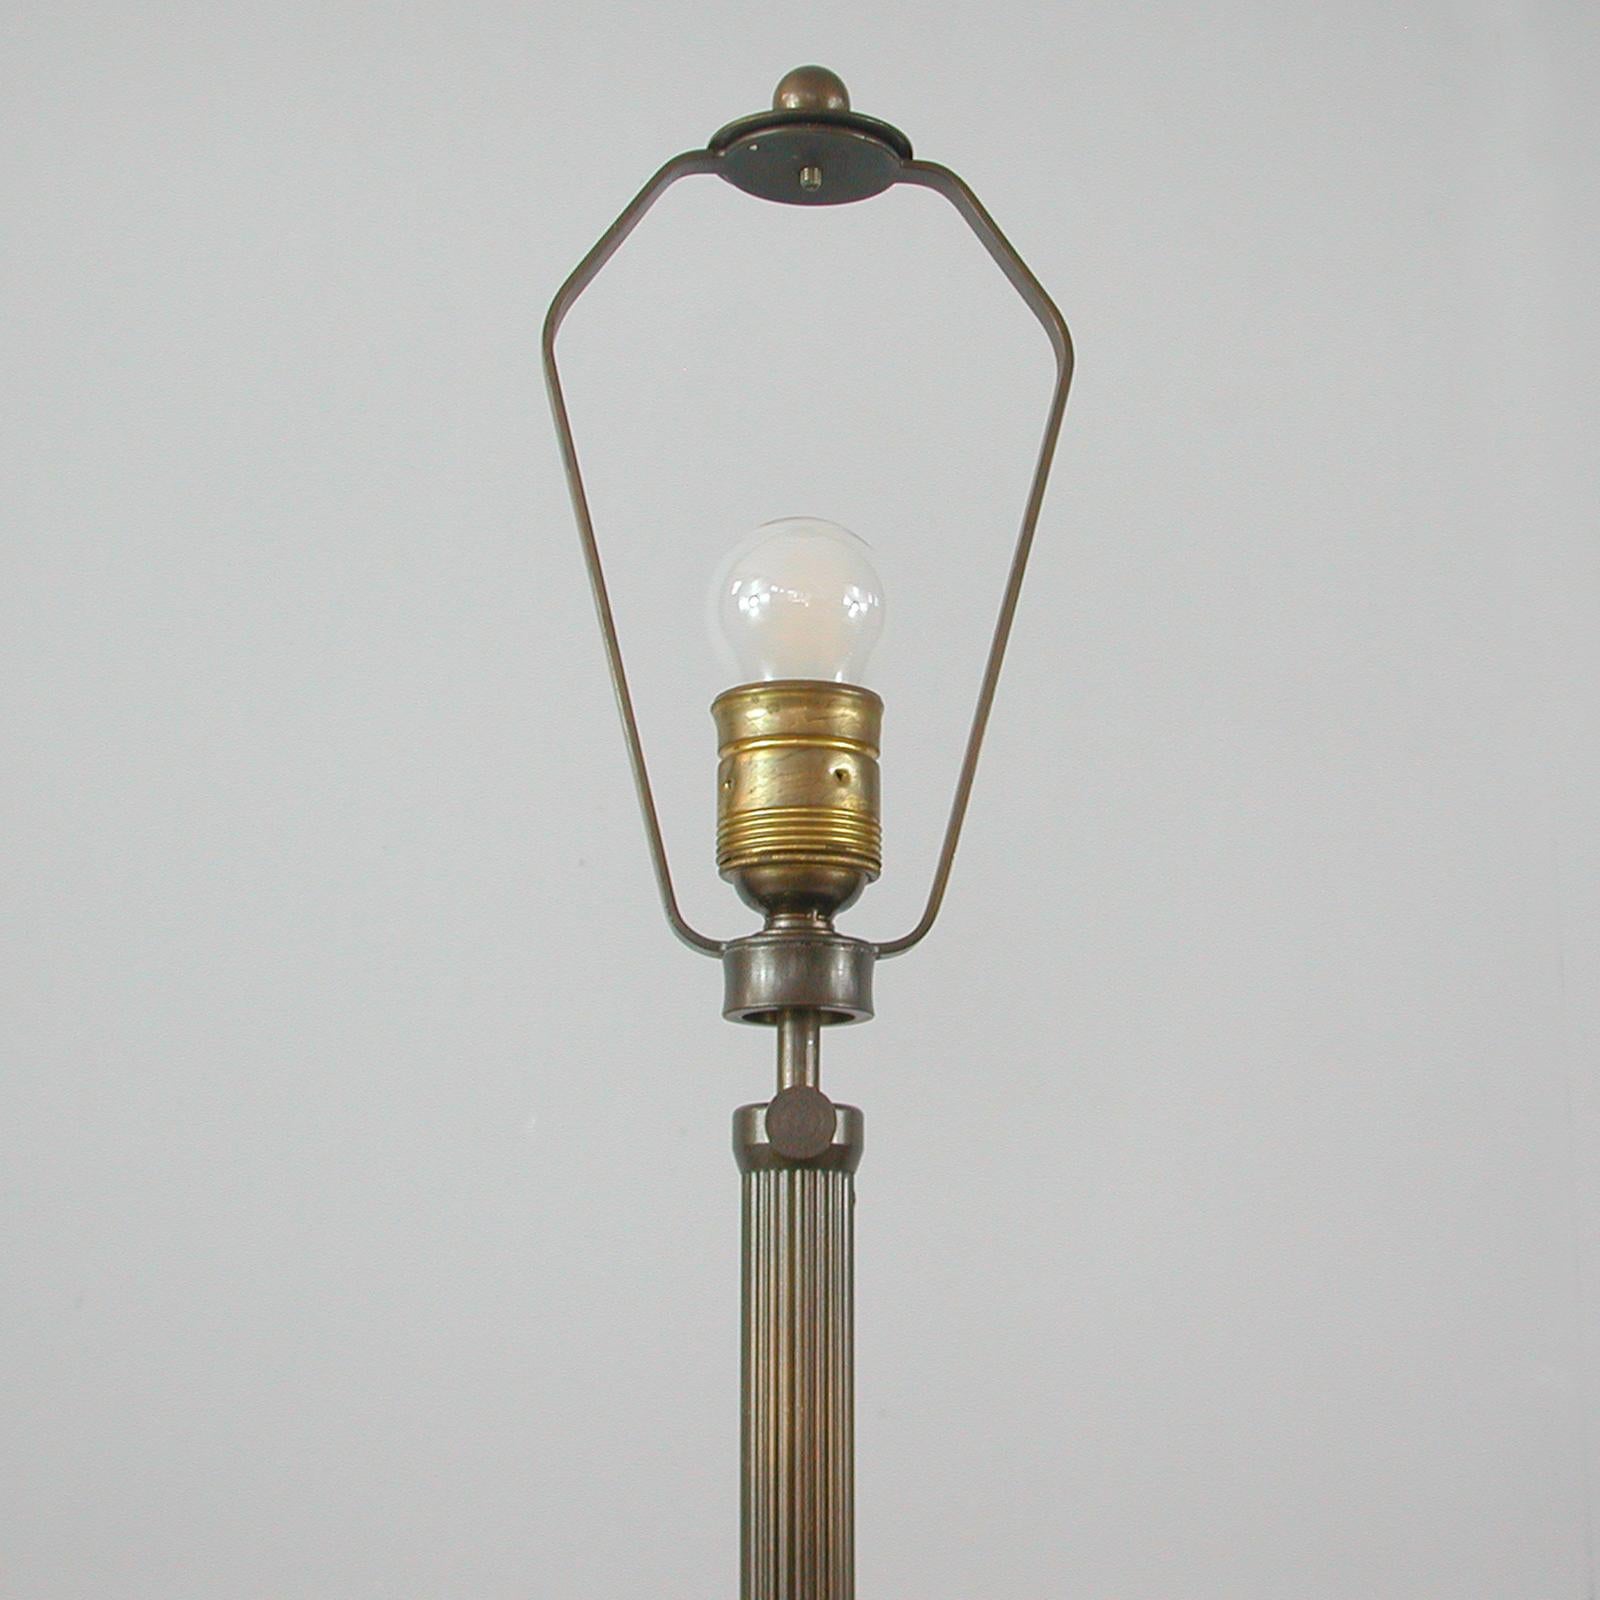 German Art Deco Height Adjustable Bronzed Brass and Bakelite Table Lamp, 1930s For Sale 2